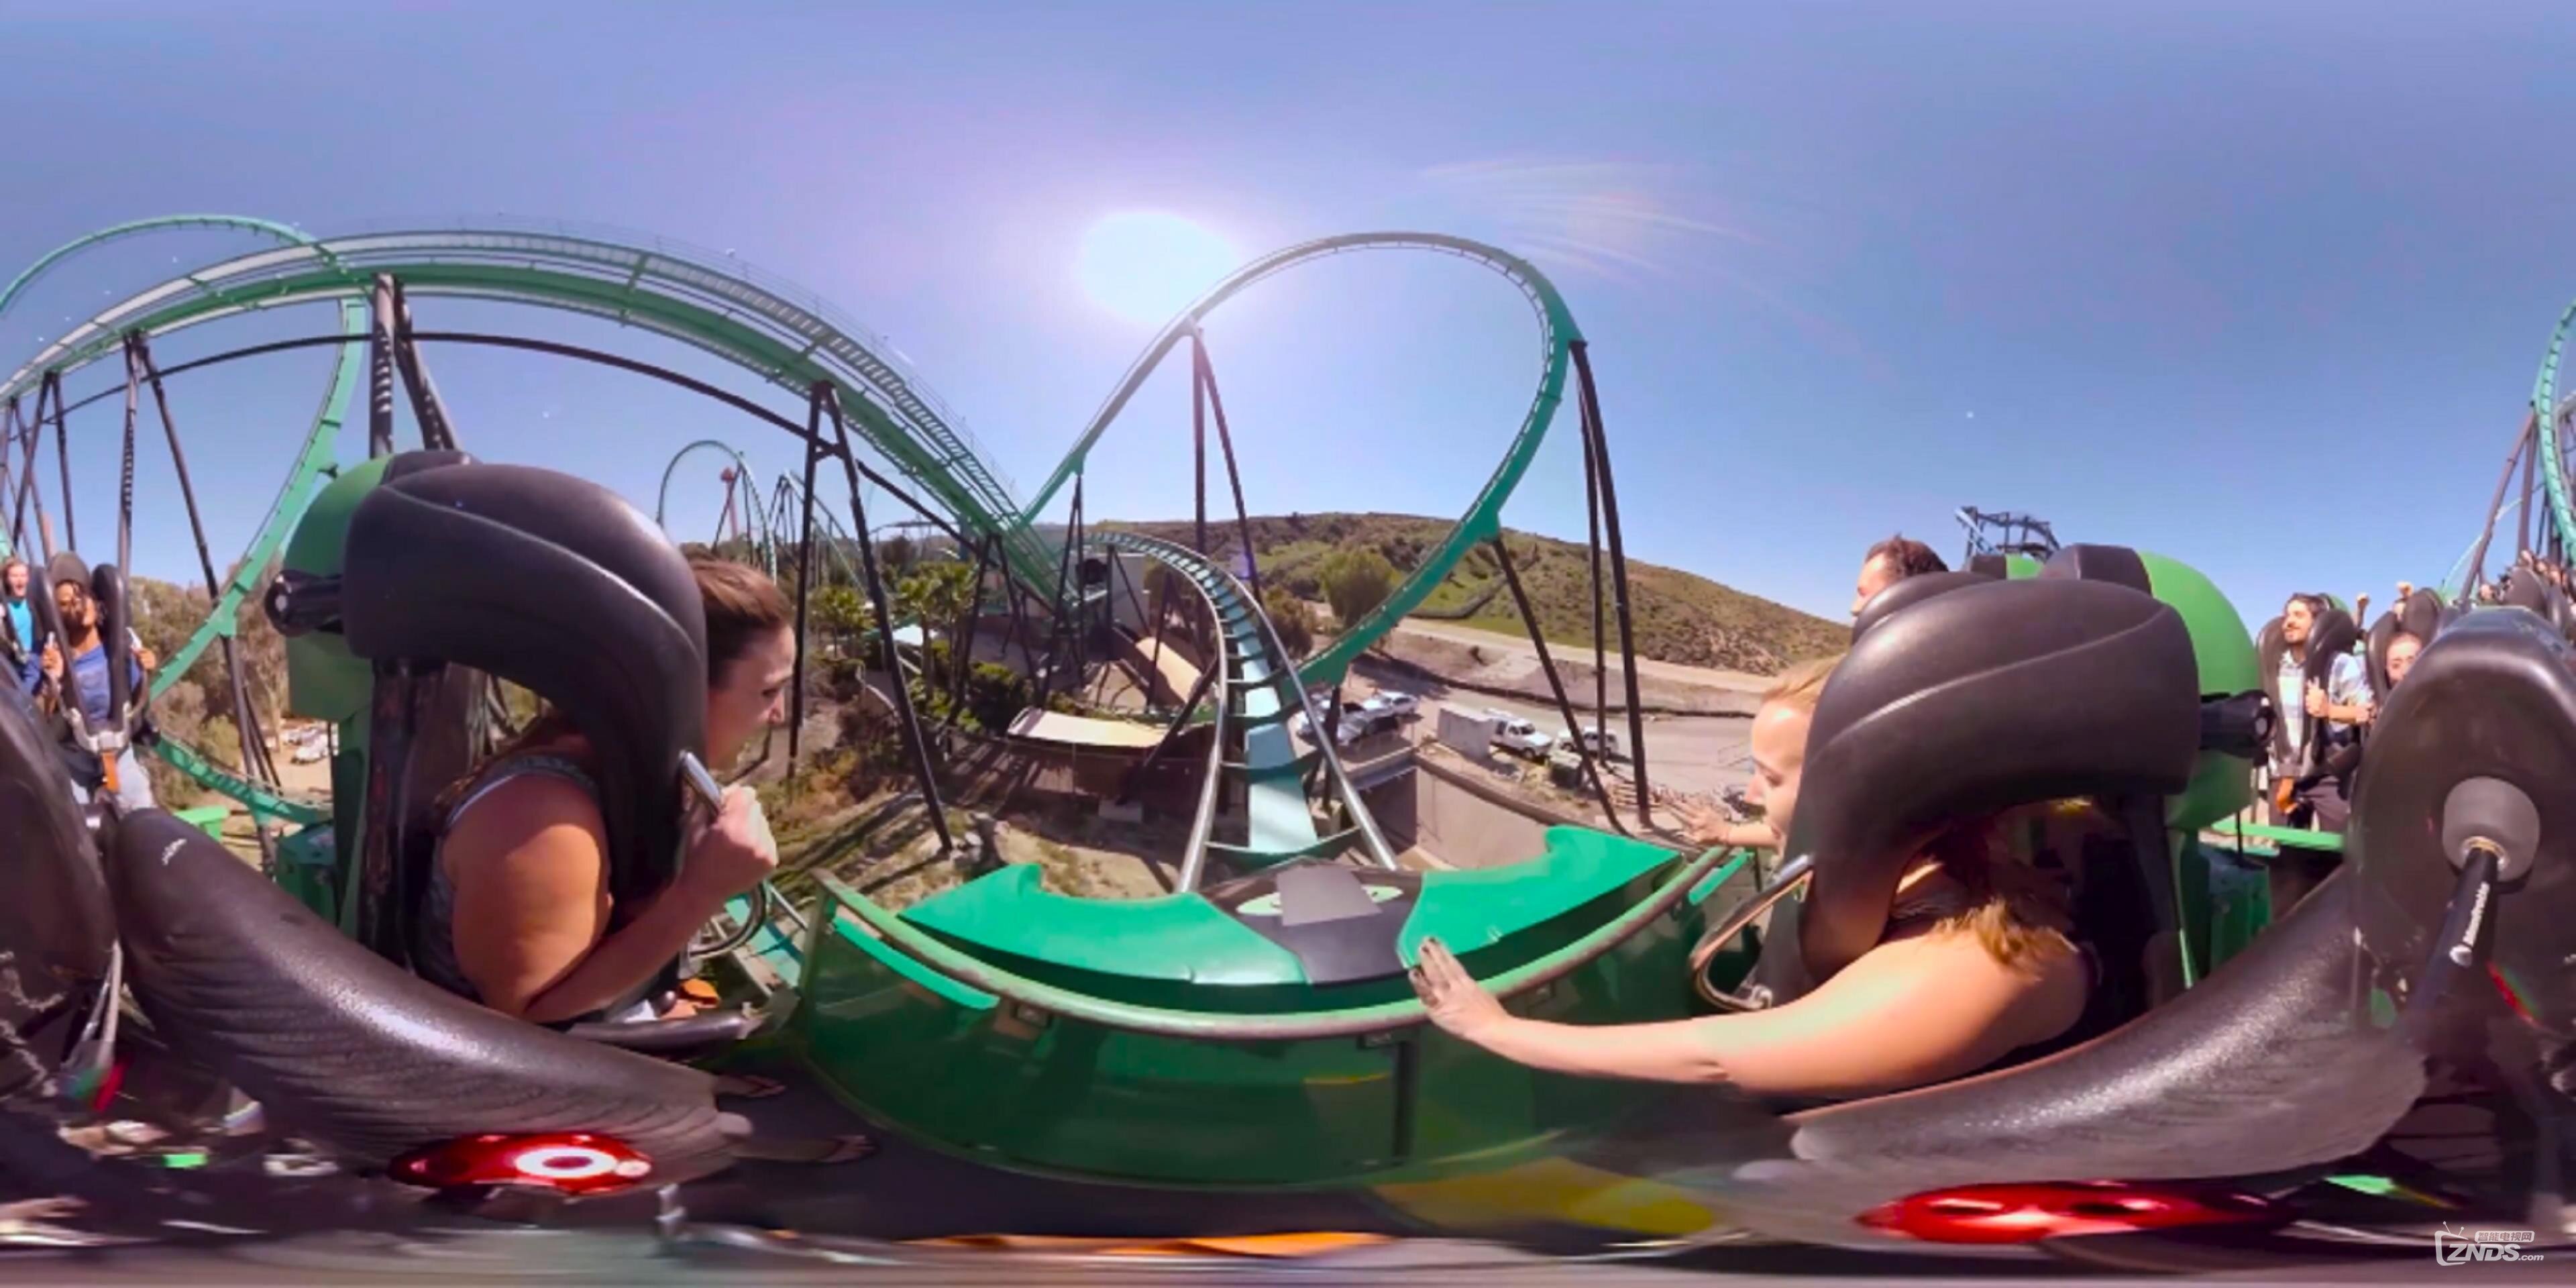 Youtube-[video]Mega Coaster_ Get Ready for the Drop (360 Video)_(1)_20160720210631.JPG